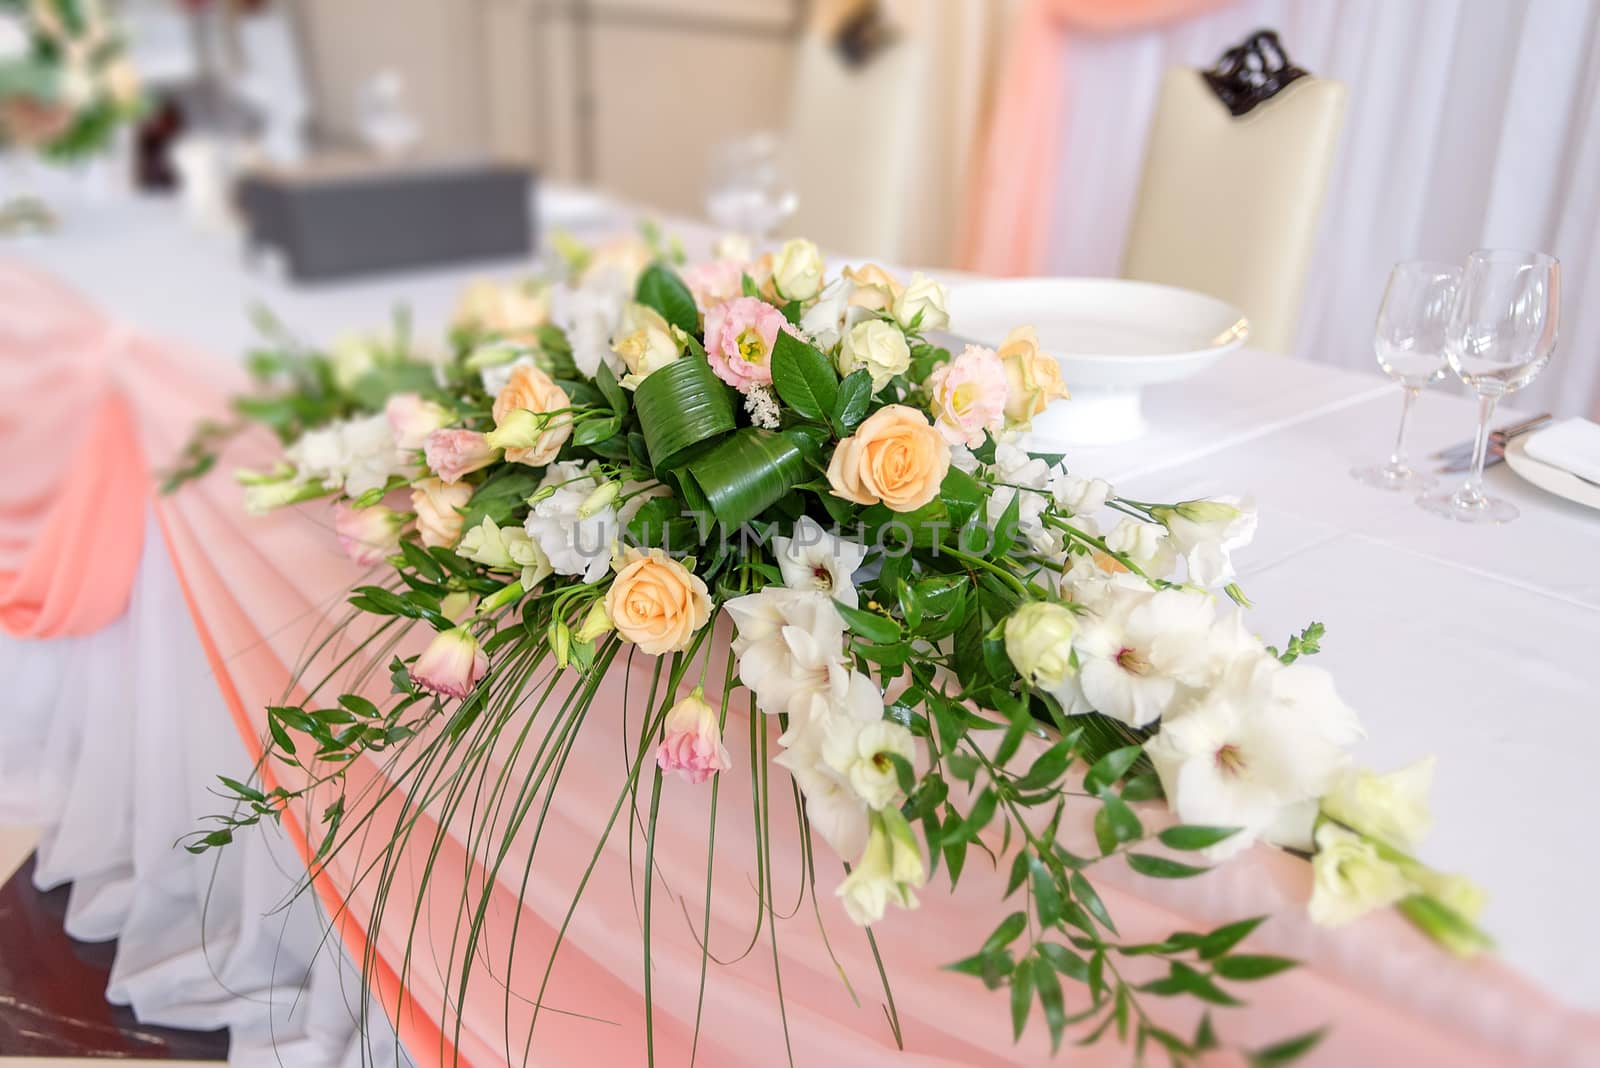 Lush wedding floral decorations on dinner table covered with peach cloth. Table for the newlyweds.